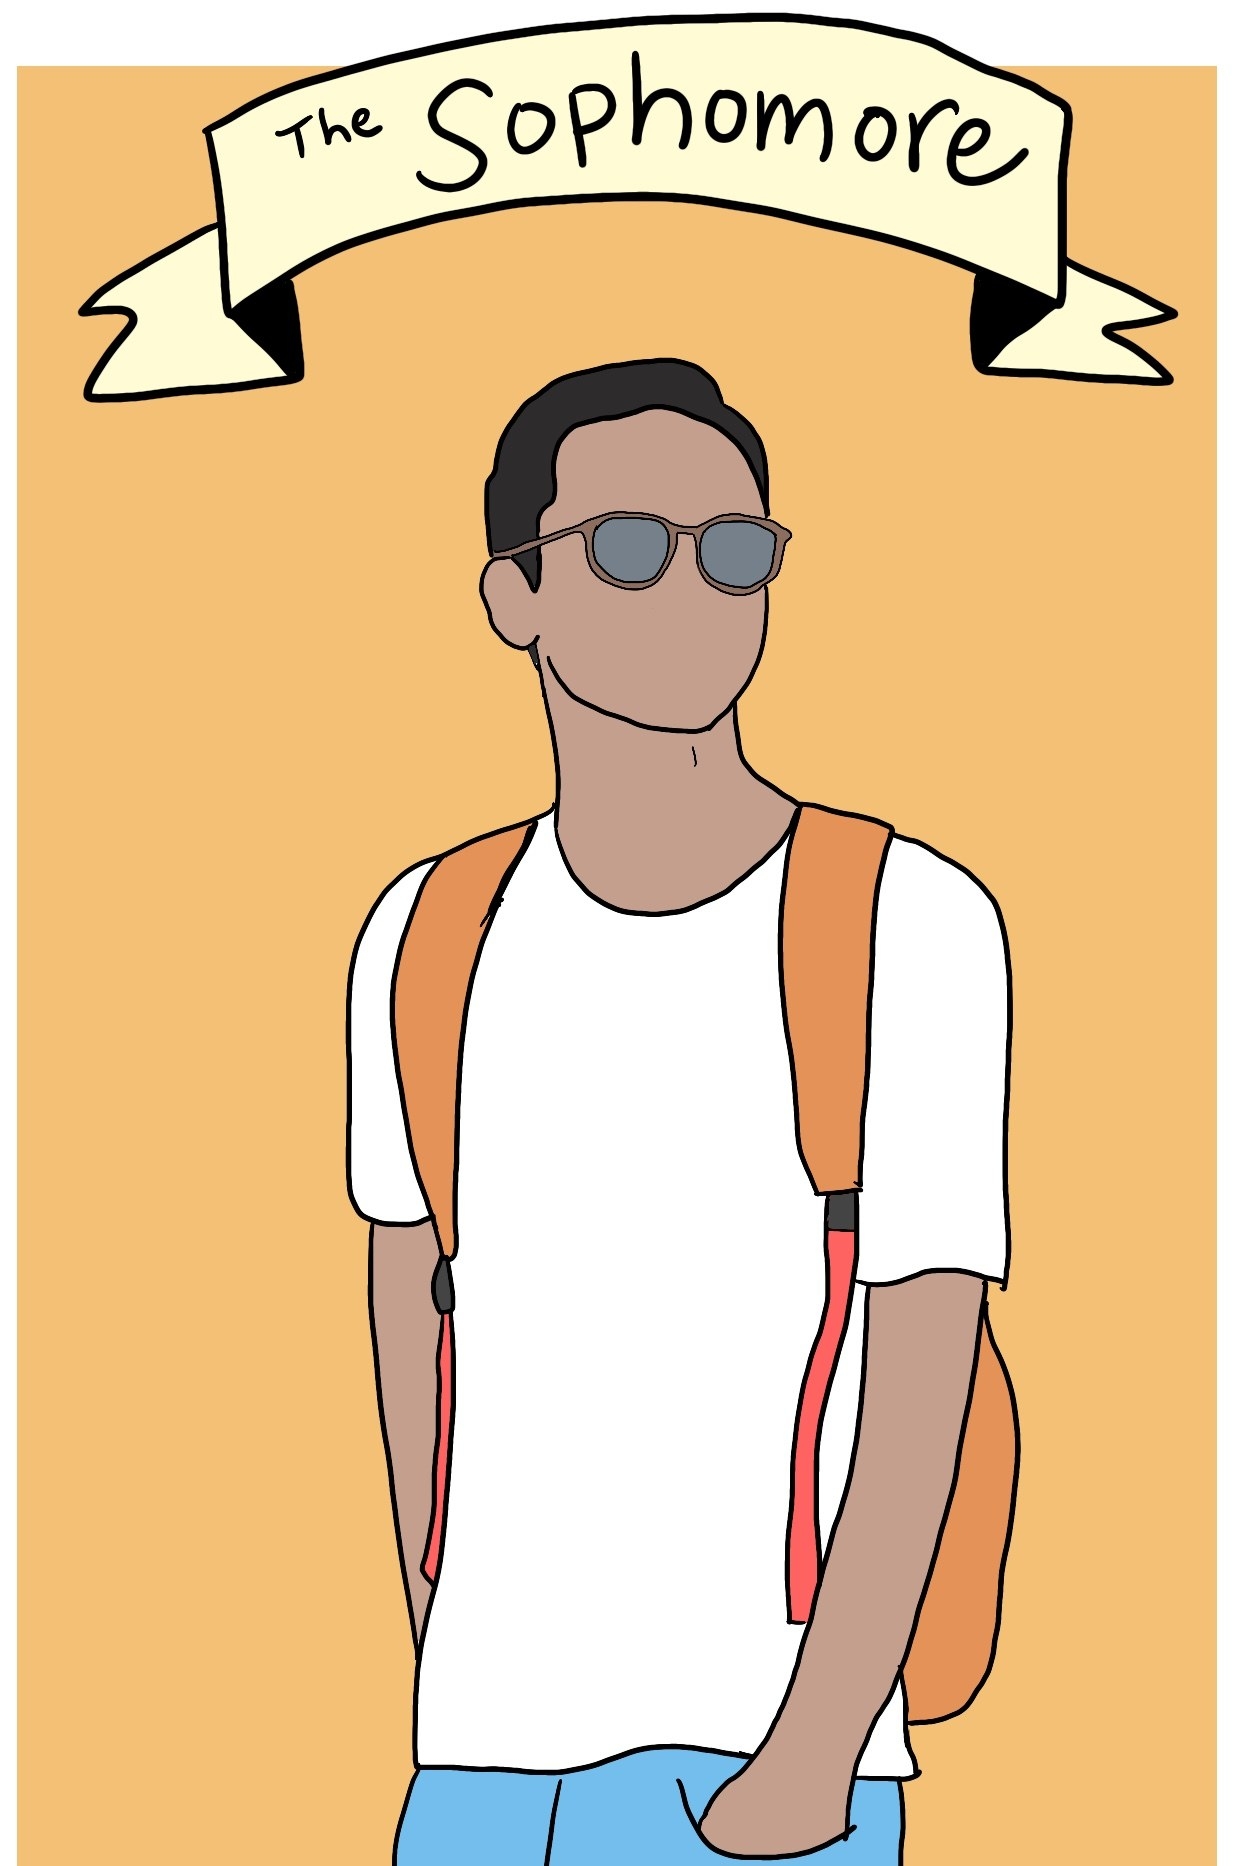 Drawing of a college student with sunglasses but no other facial features